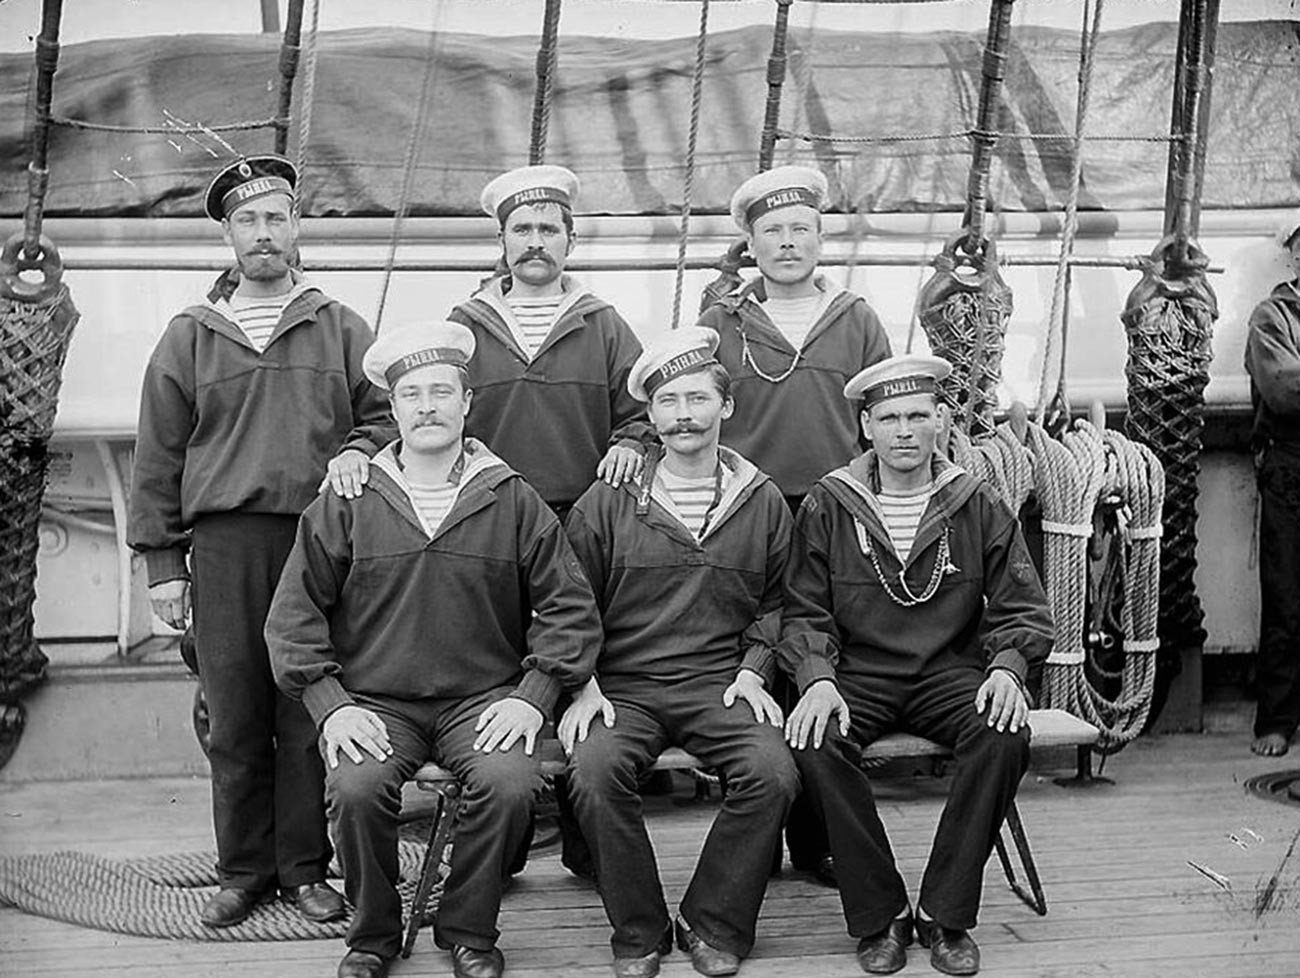 Russian sailors of the 19th century in an old-style tel'nyashka